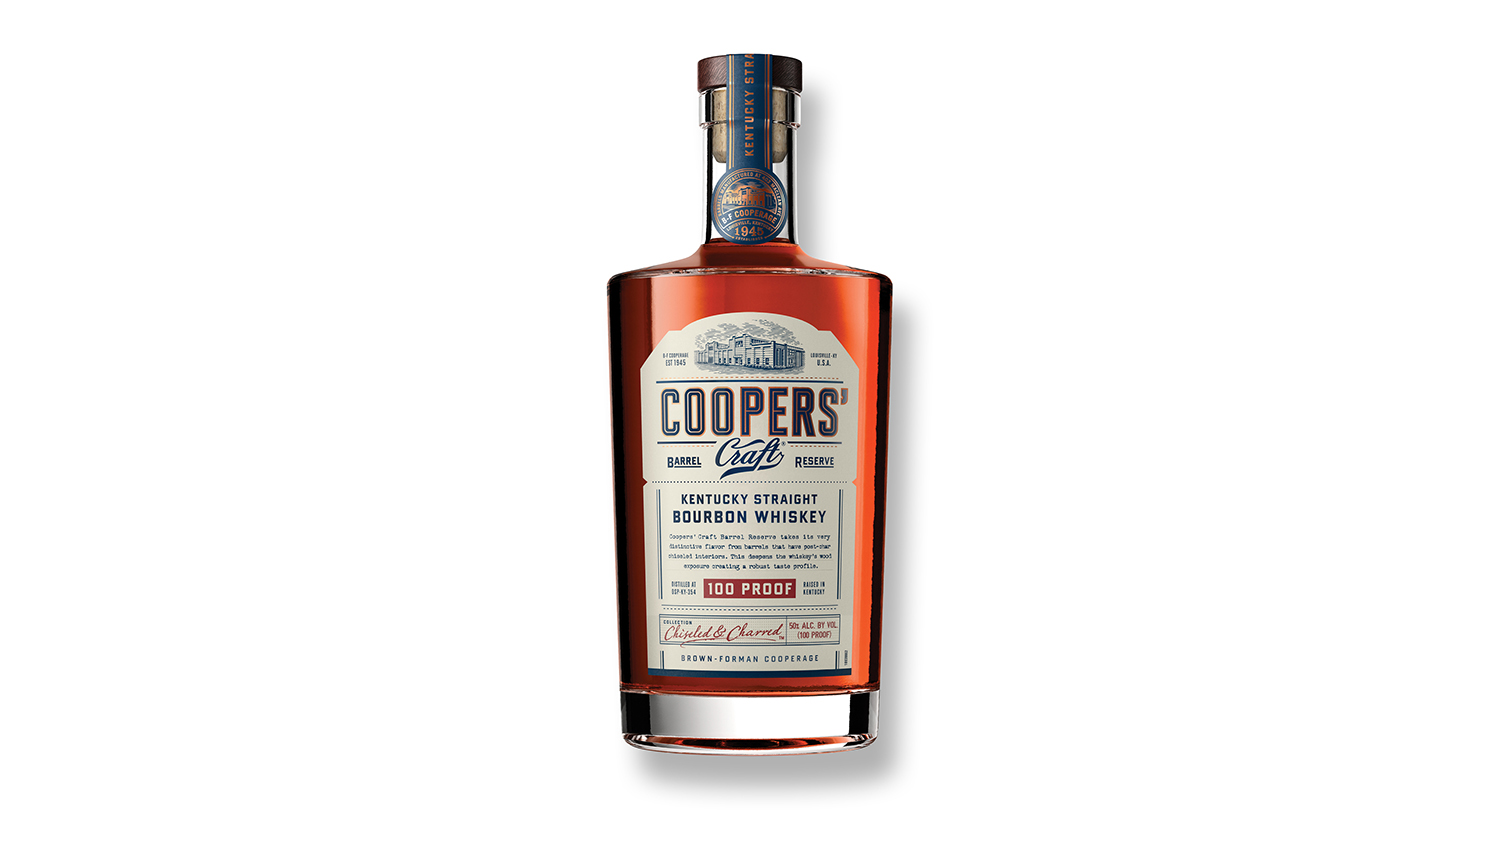 Coopers Craft Barrel Reserve Feature ?p=1